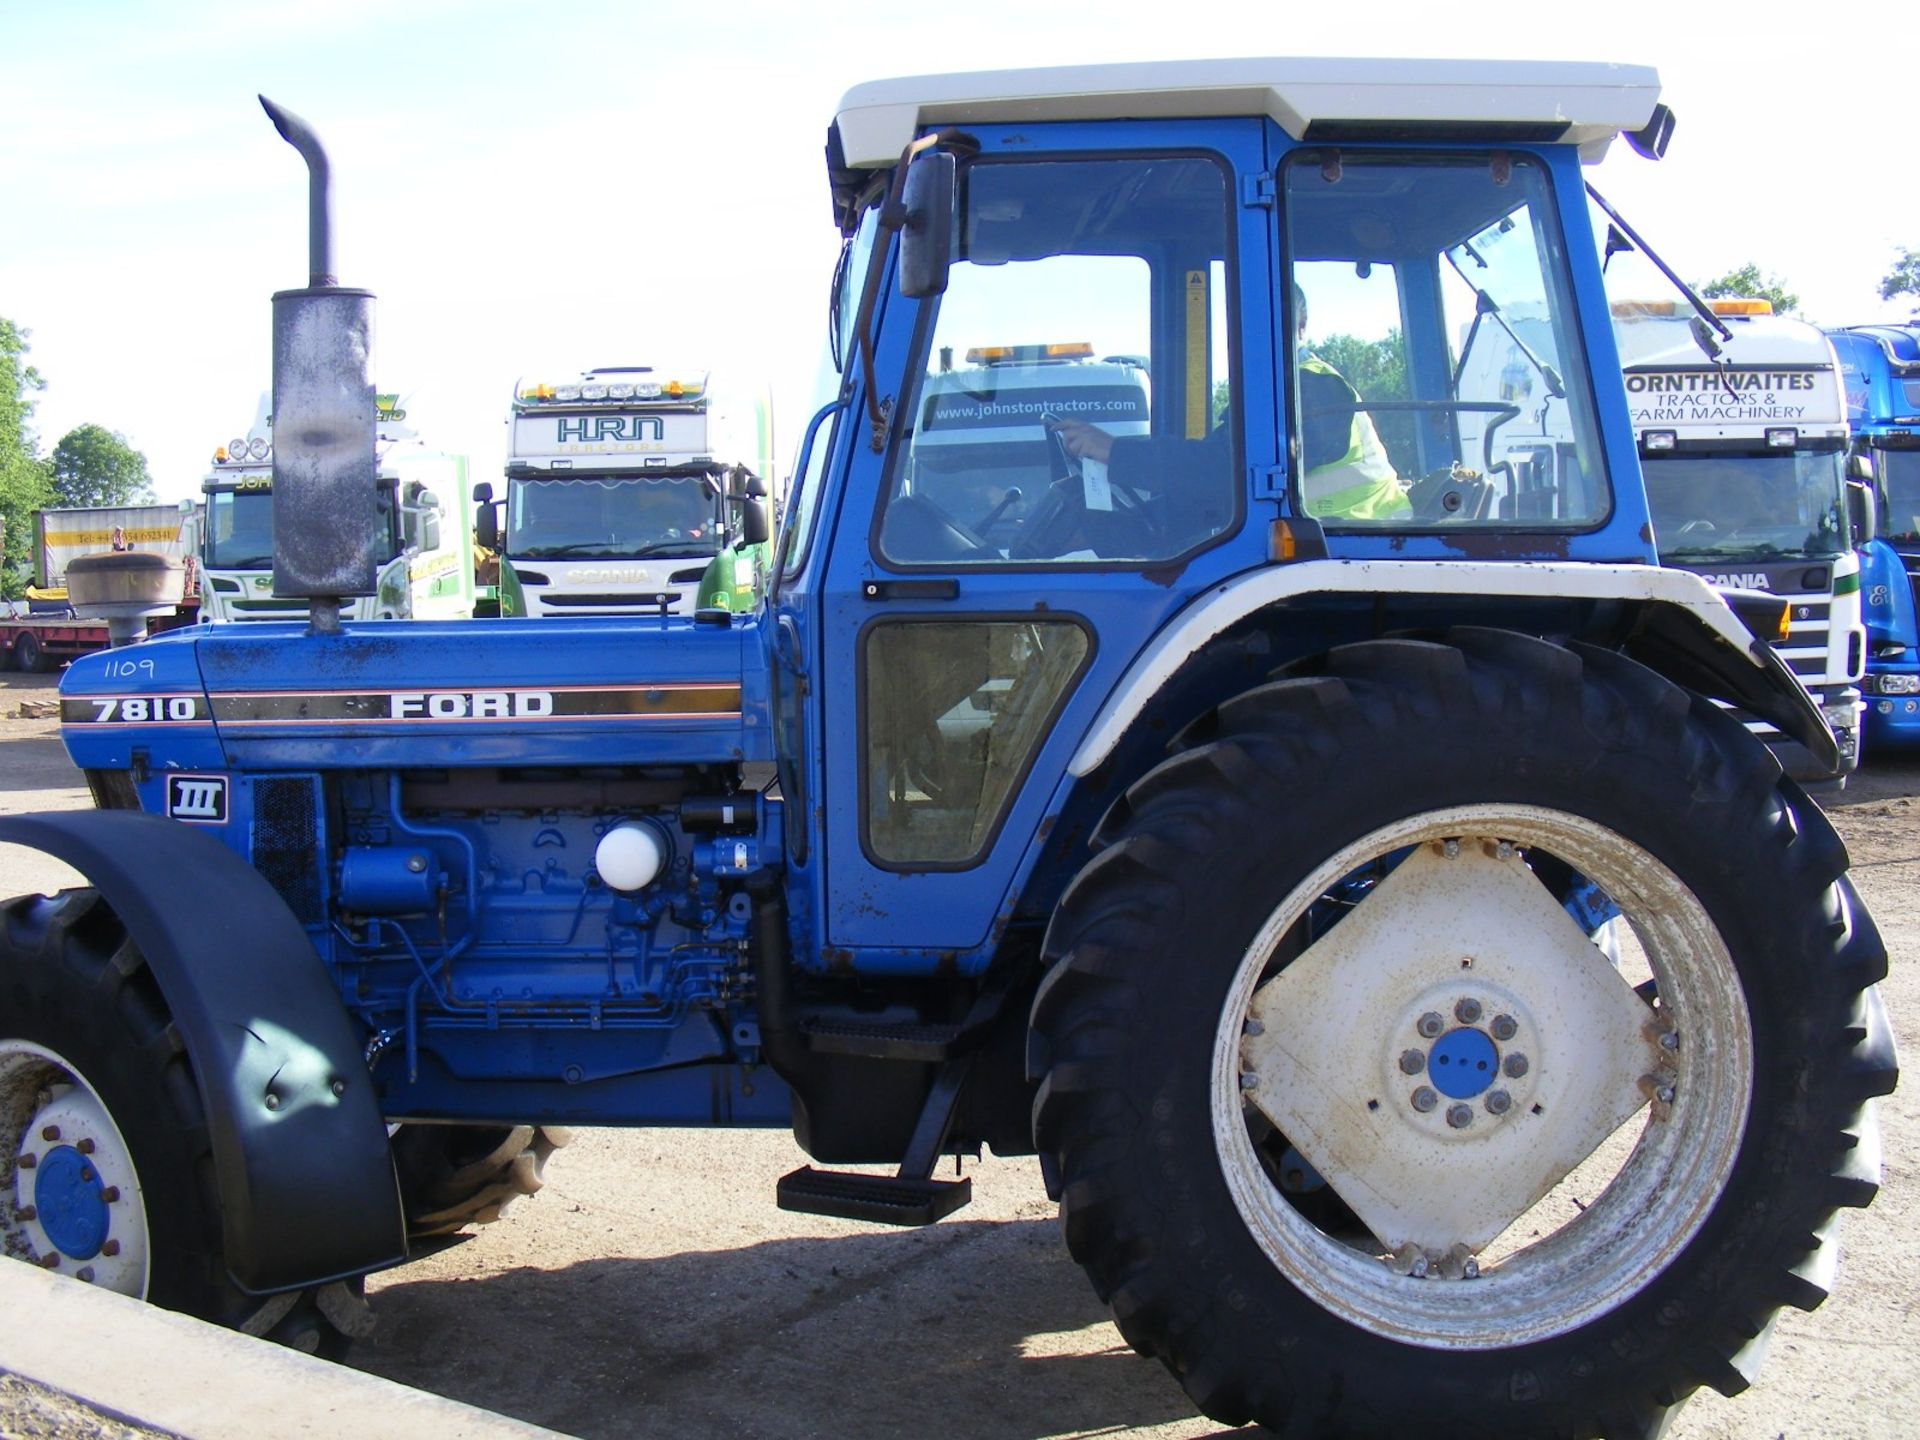 1991 Ford 7810 4wd Tractor - Image 6 of 8